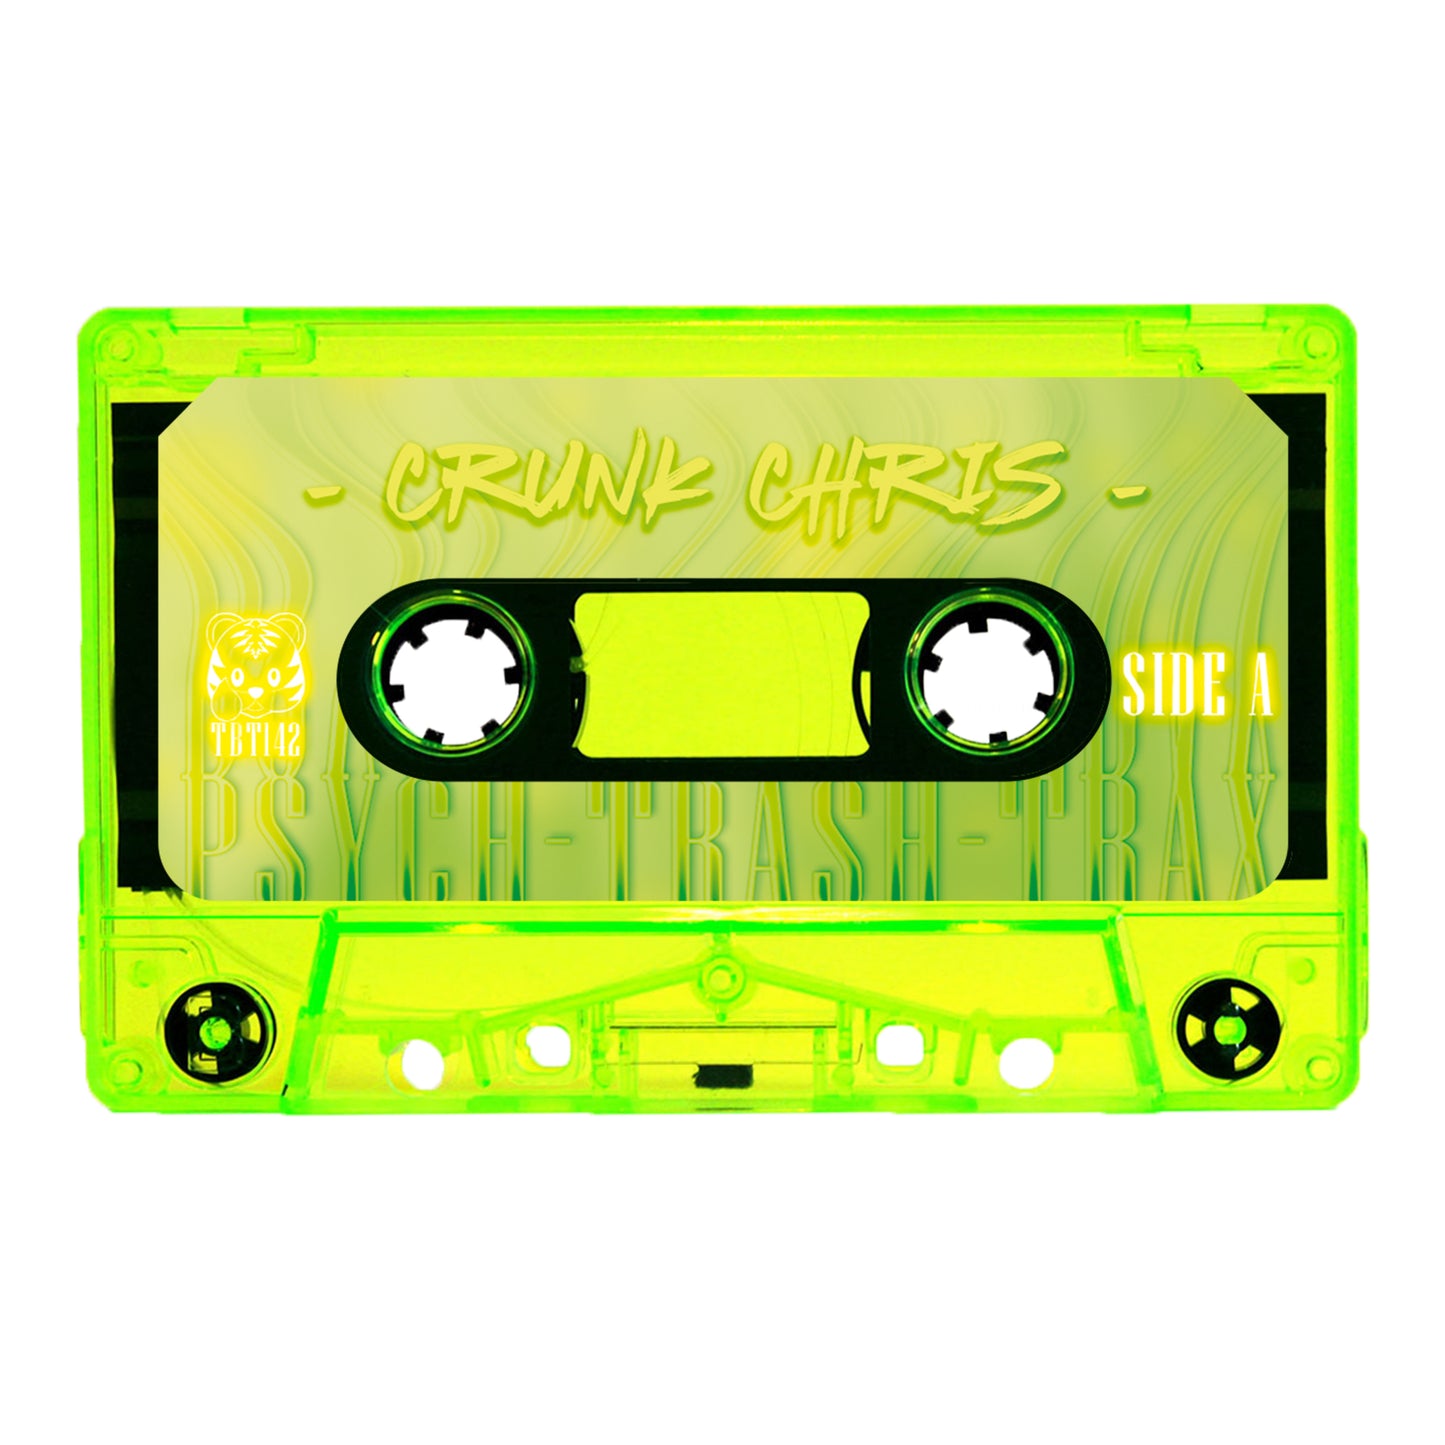 Crunk Chris - "Psych-Trash-Trax" Limited Edition Cassette Tape